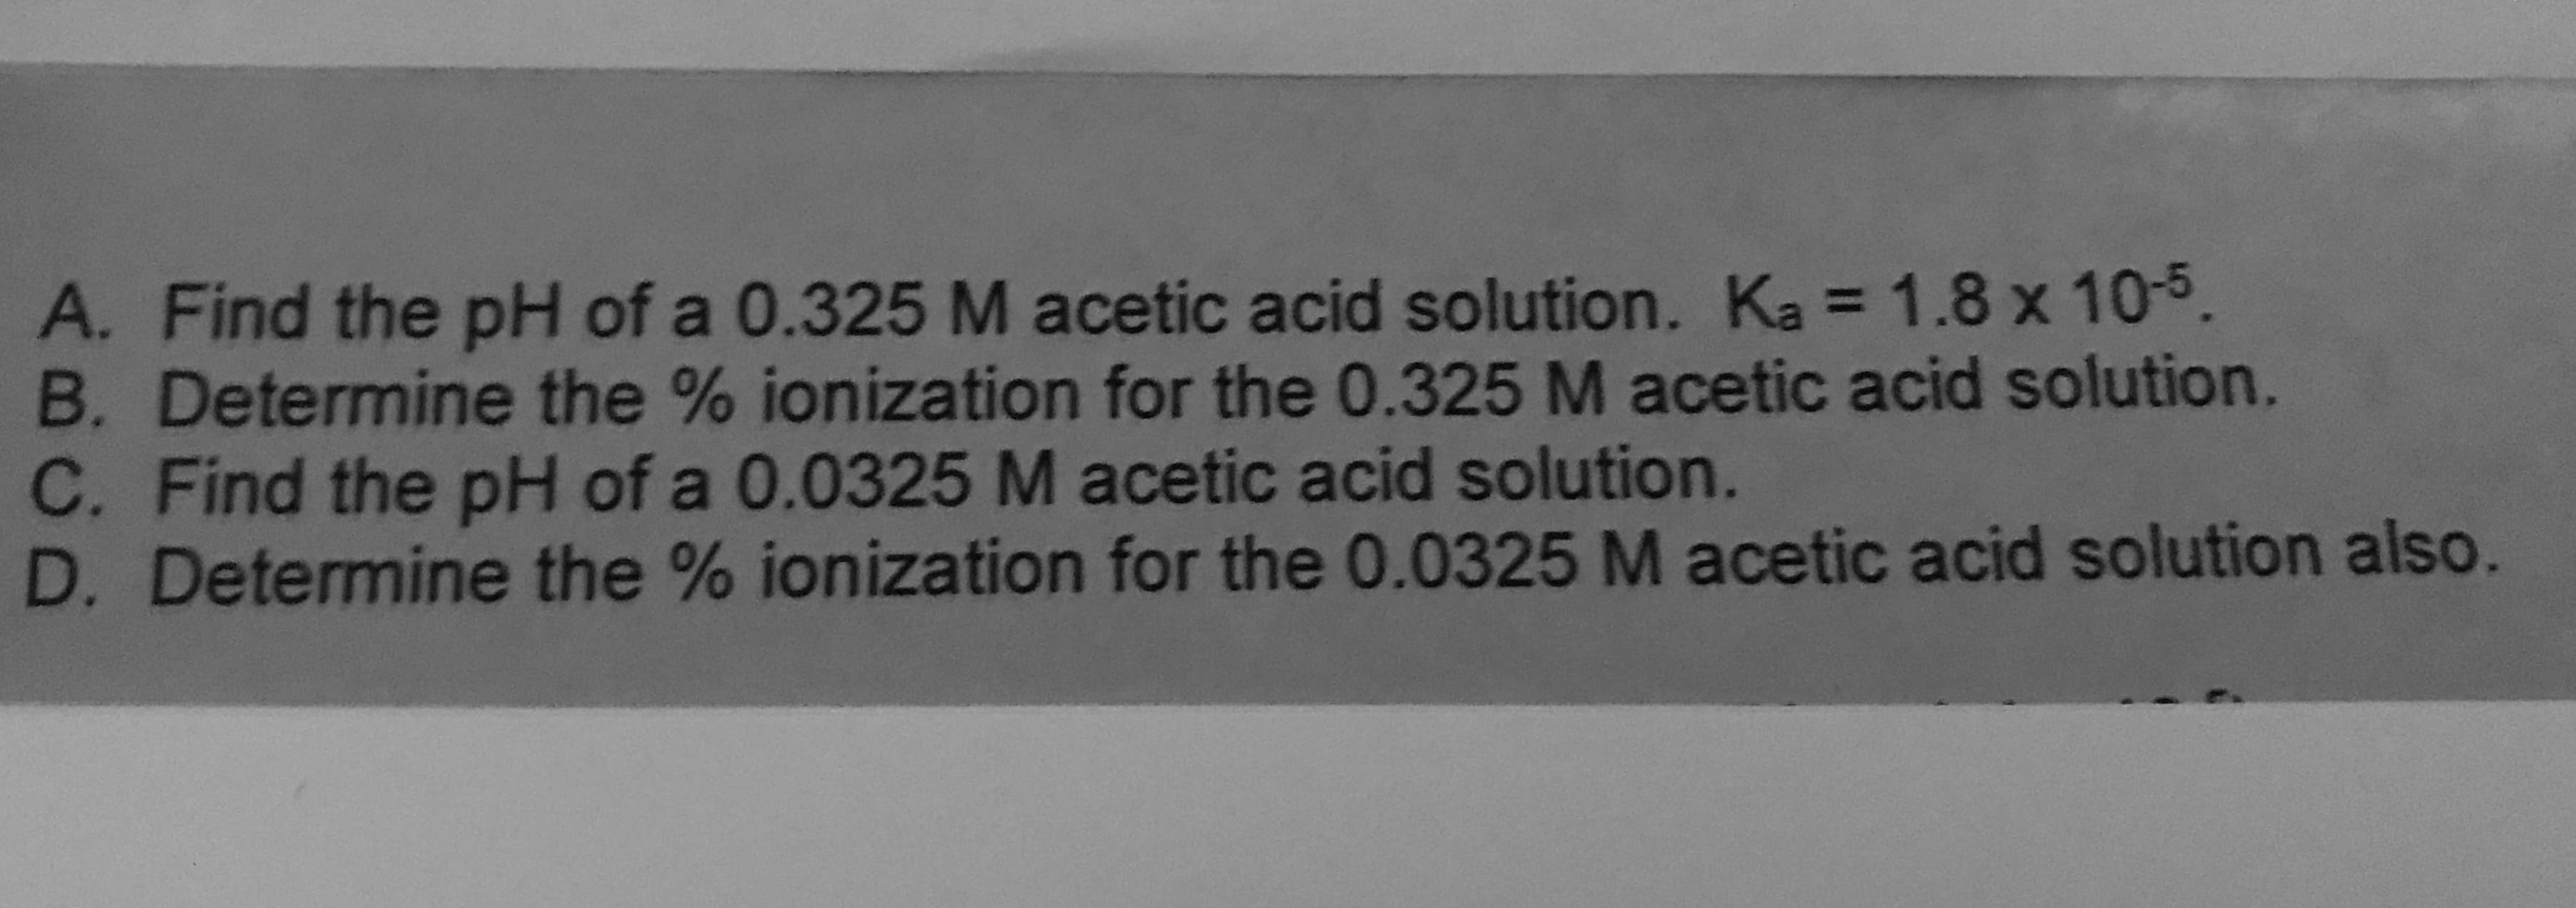 A. Find the pH of a 0.325 M acetic acid solution. Ka = 1.8 x 10-5.
B. Determine the % ionization for the 0.325 M acetic acid solution.
C. Find the pH of a 0.0325 M acetic acid solution.
D. Determine the % ionization for the 0.0325 M acetic acid solution also.
%3D
